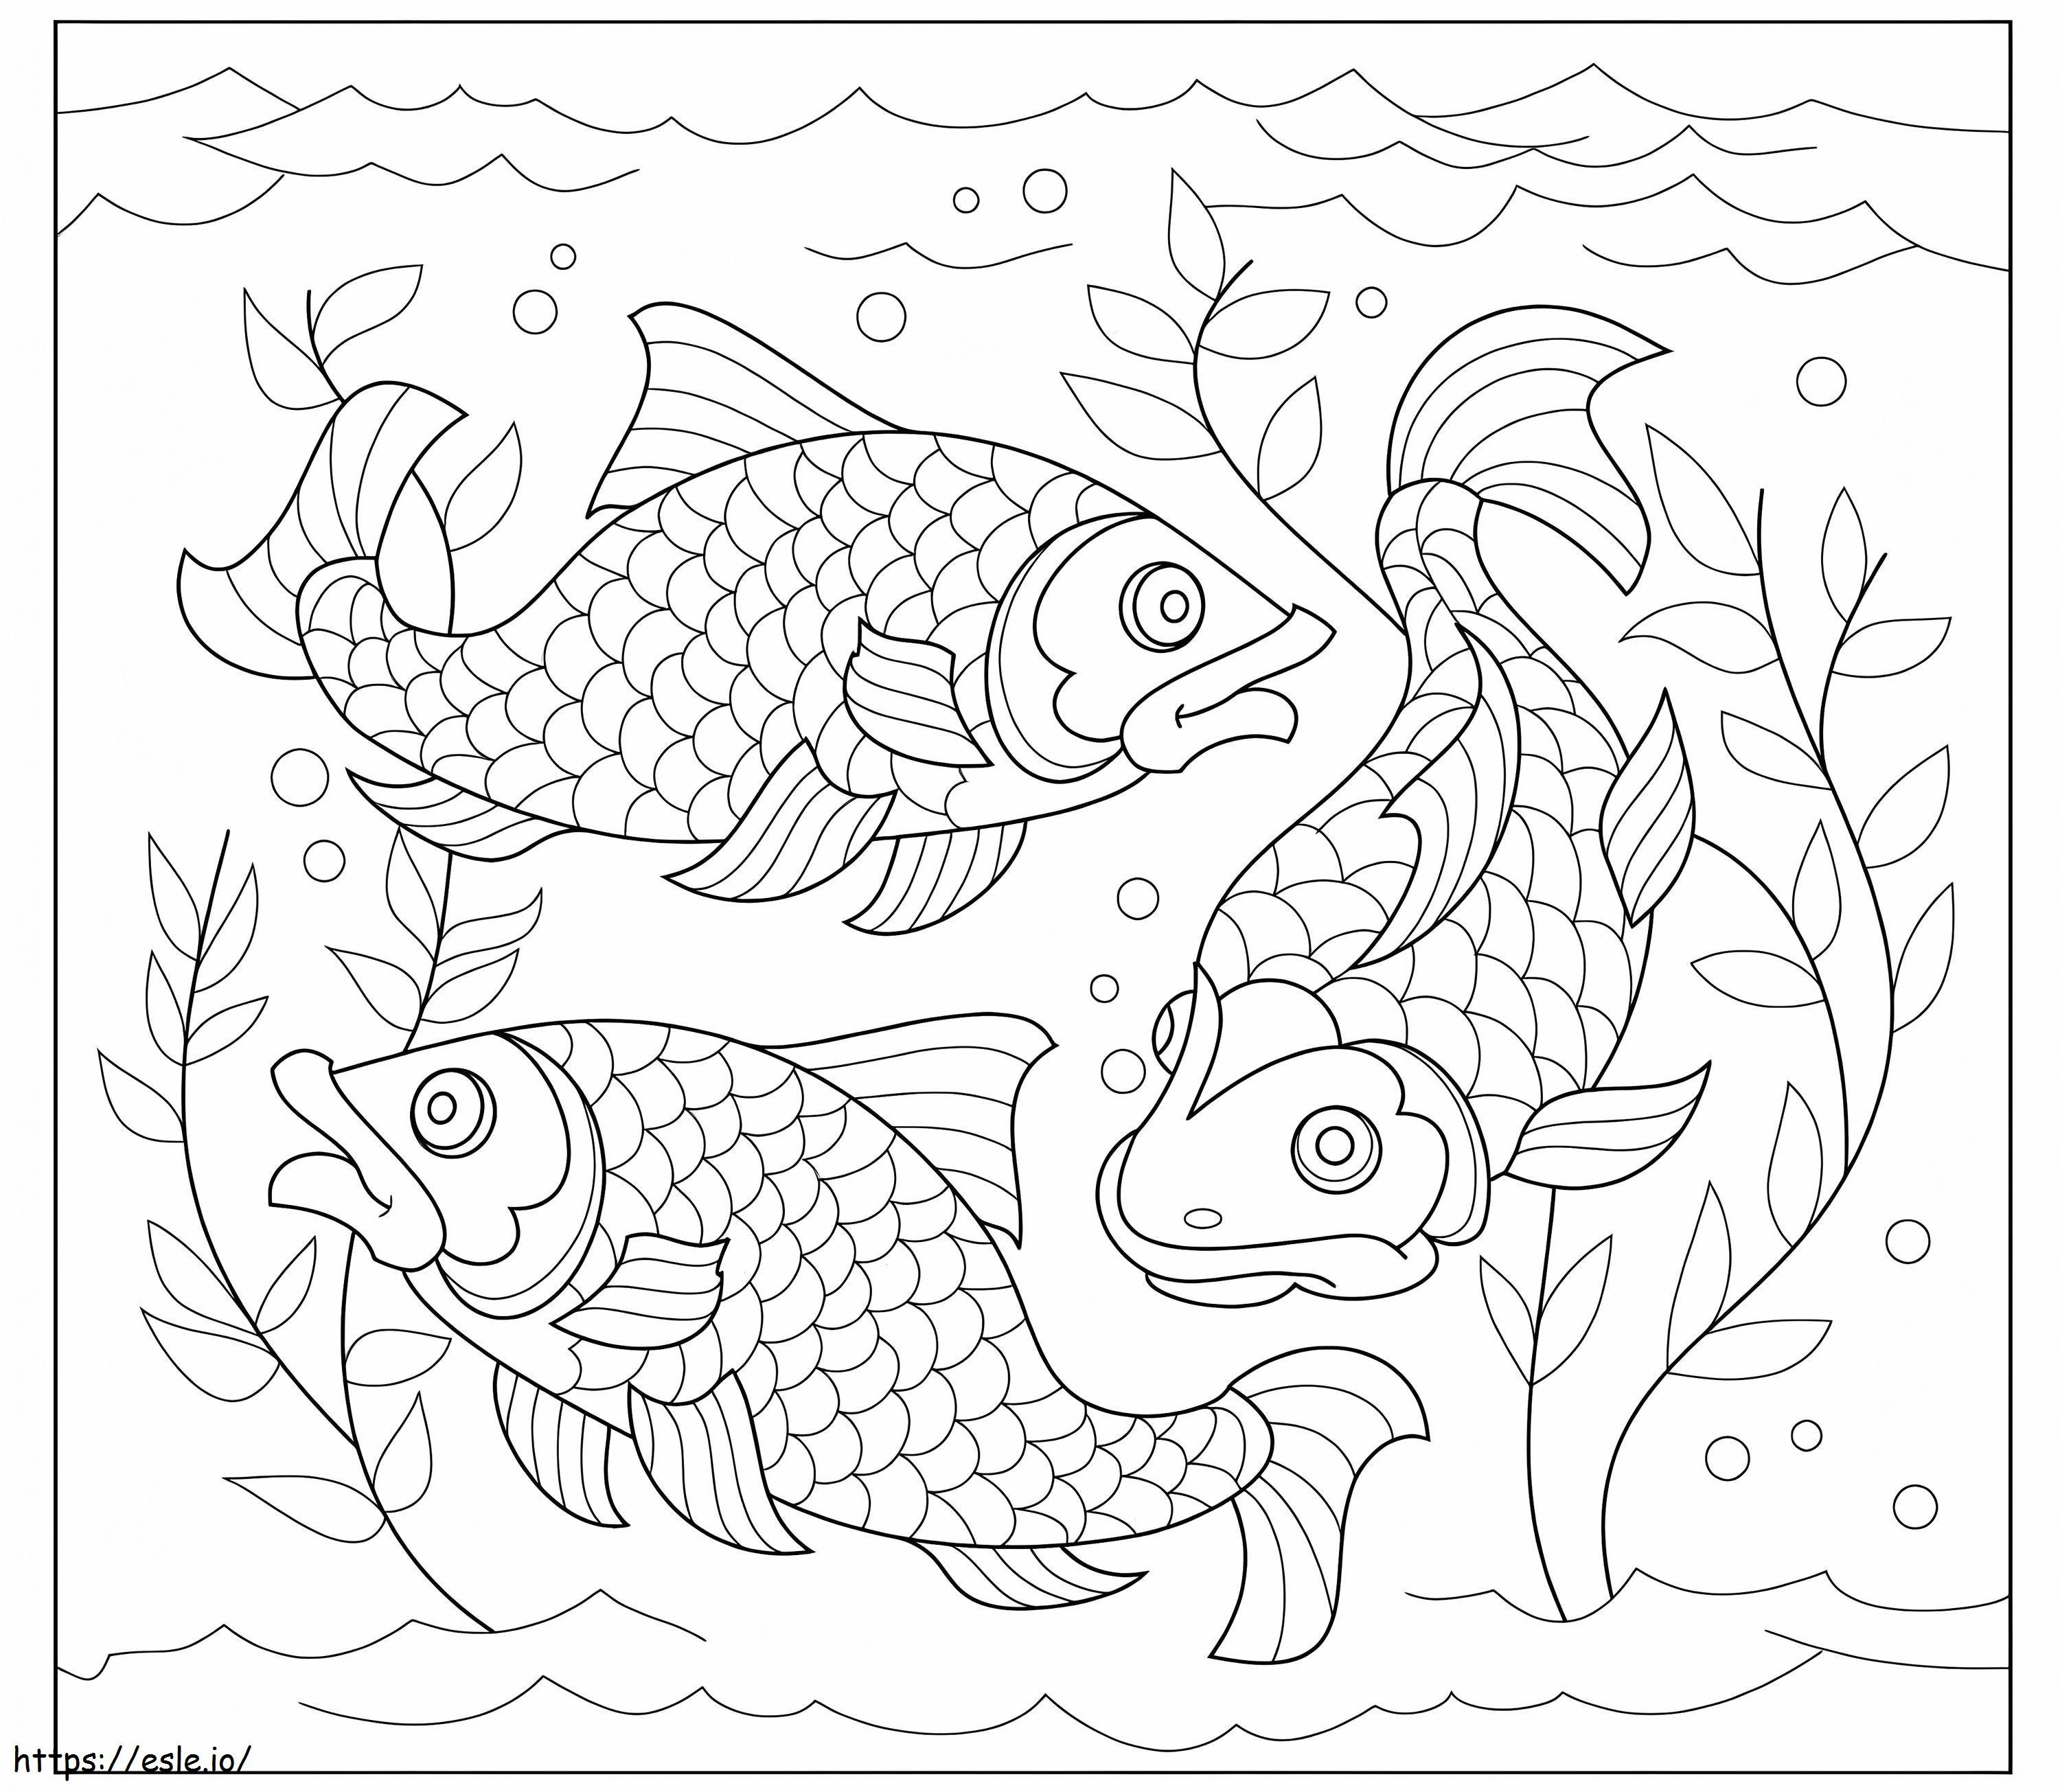 Mandala Of The Three Fishes coloring page